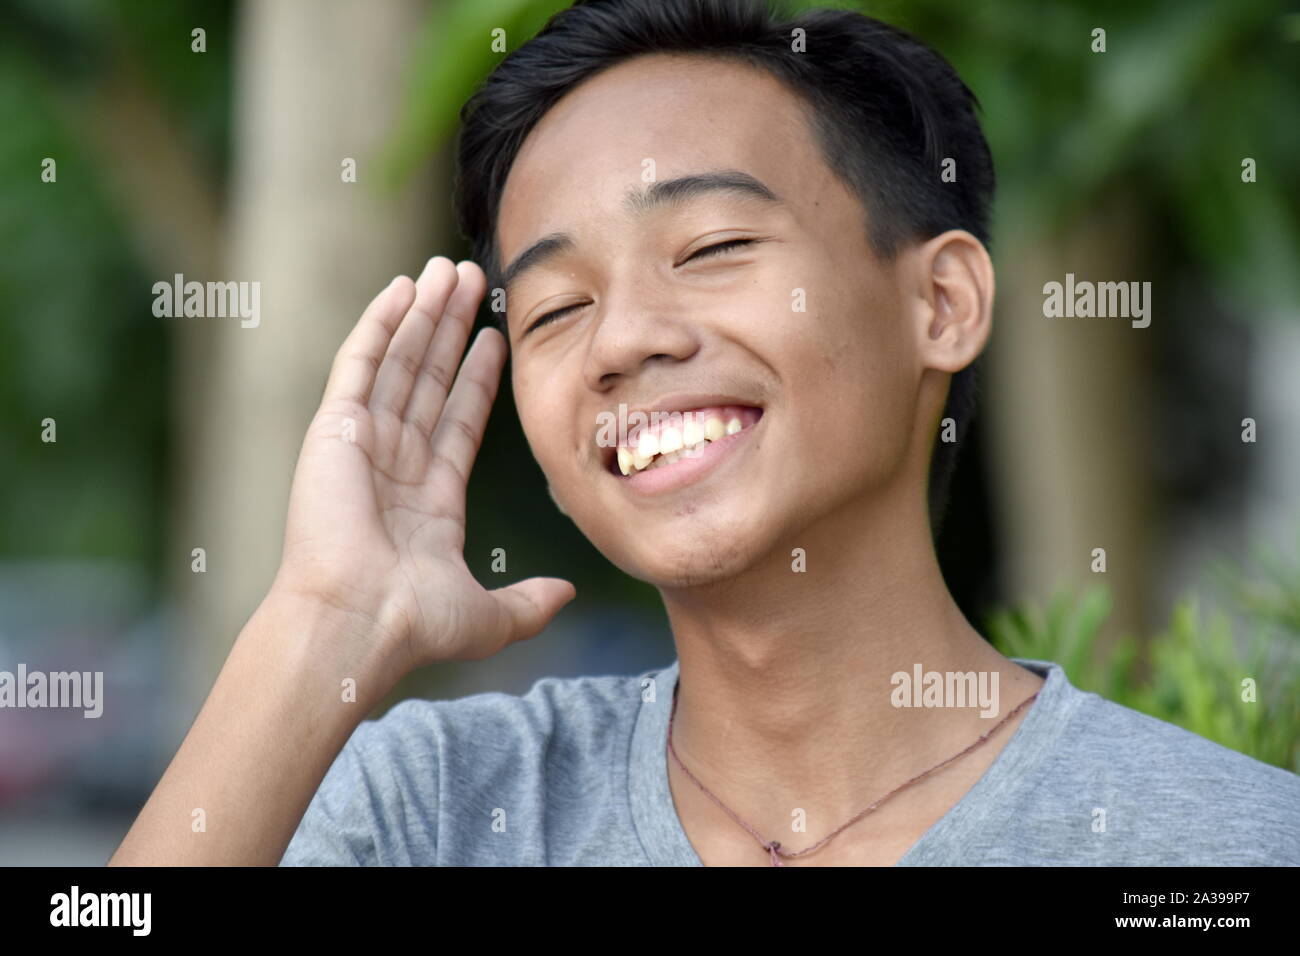 A Male Youngster And Laughter Stock Photo